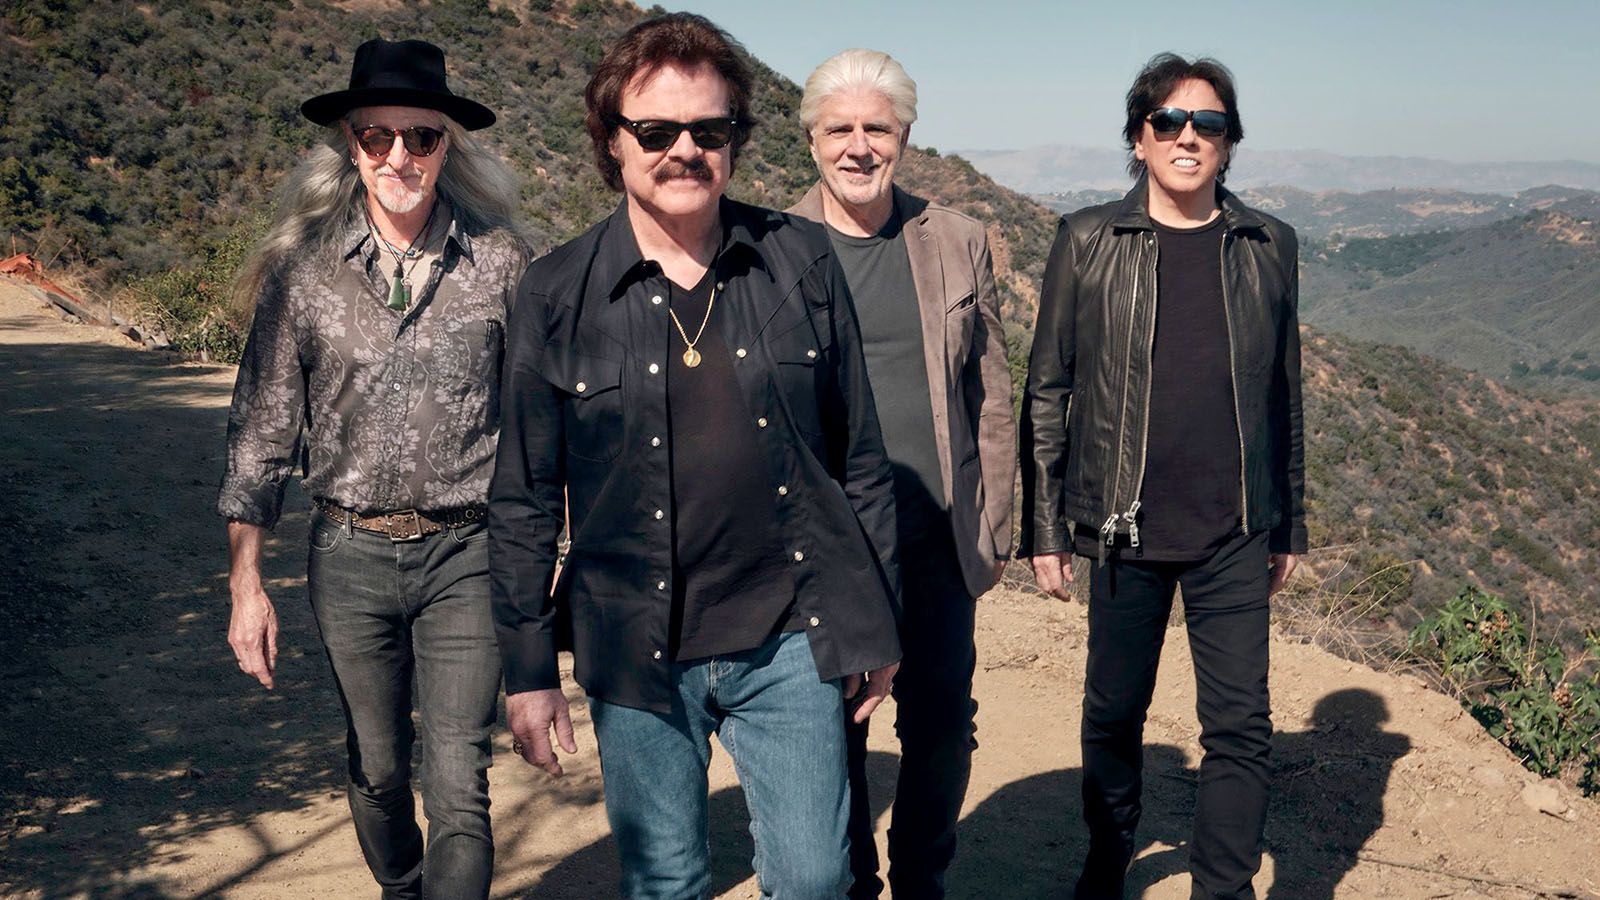 The Doobie Brothers will be at Memorial Coliseum on Friday, June 23.